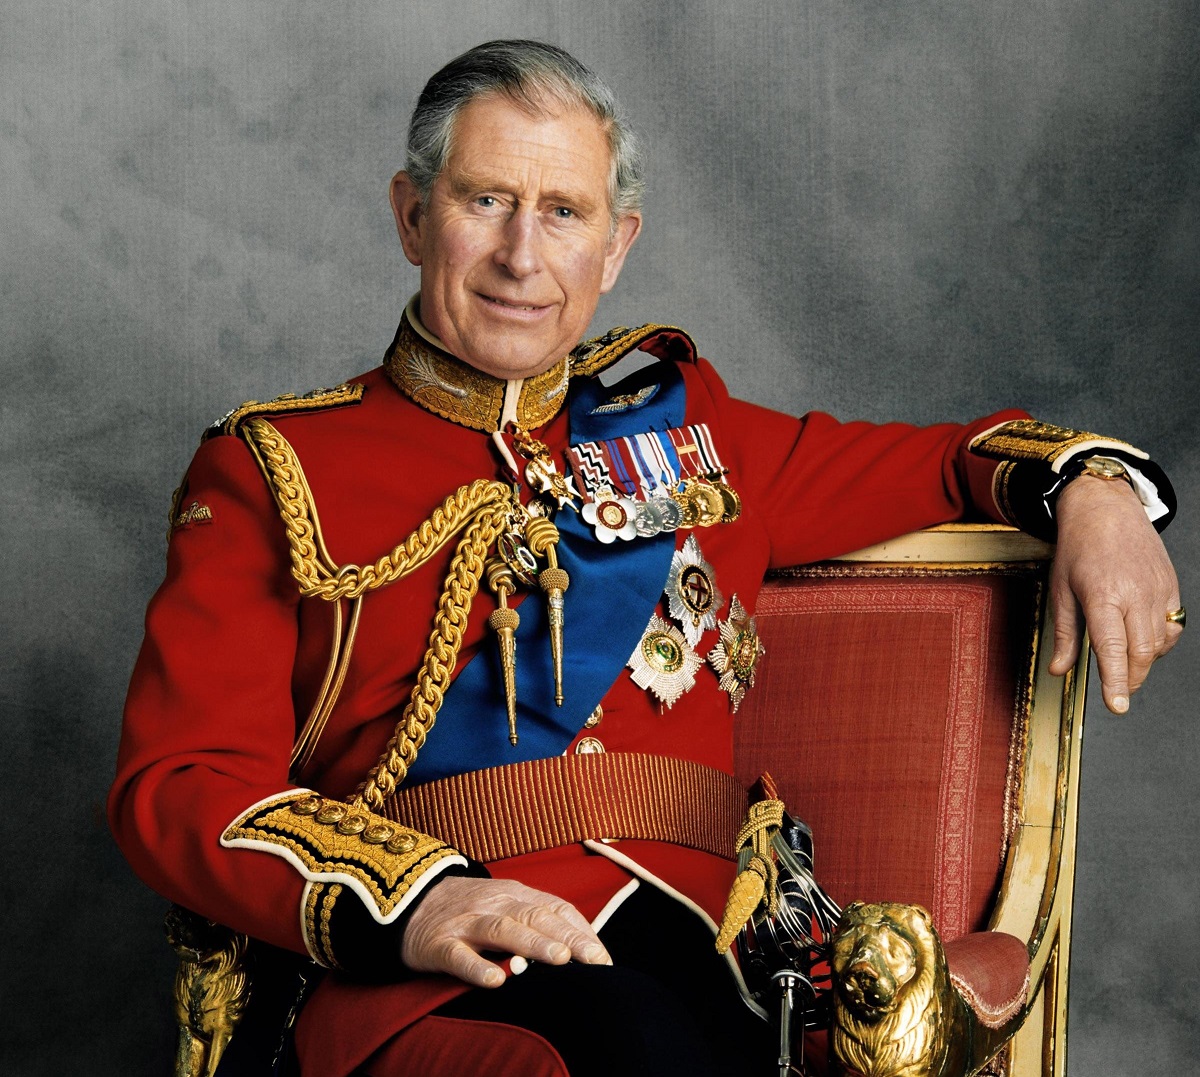 Prince Charles posing for an official portrait to mark his birthday